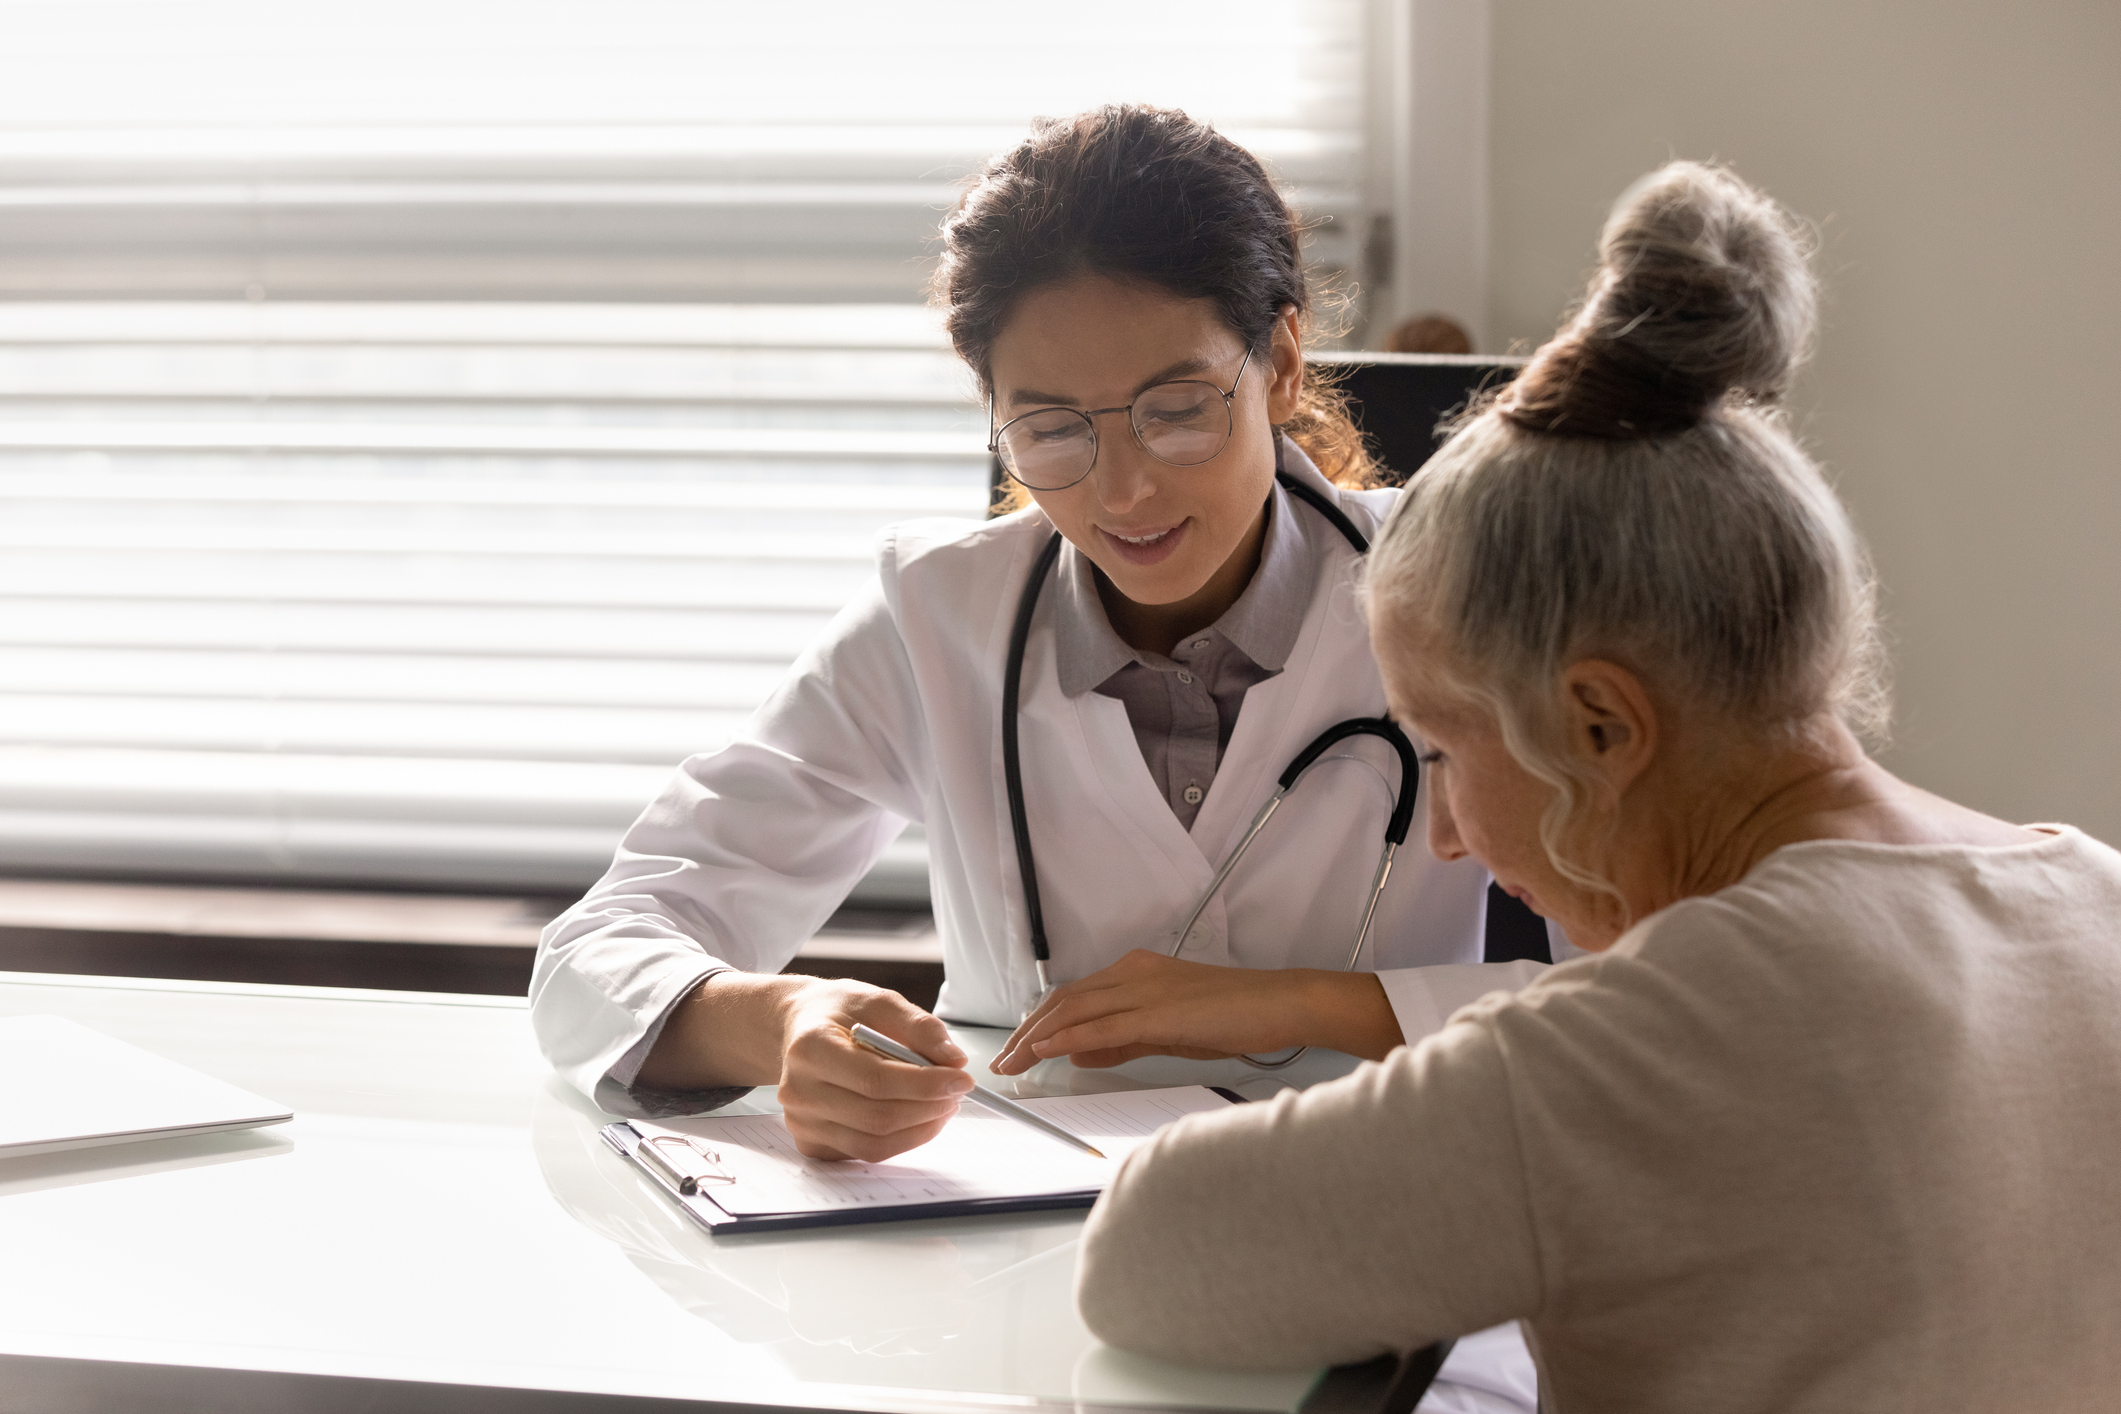 Female doctor consulting an older woman. They are sitting at a table looking at some paperwor.